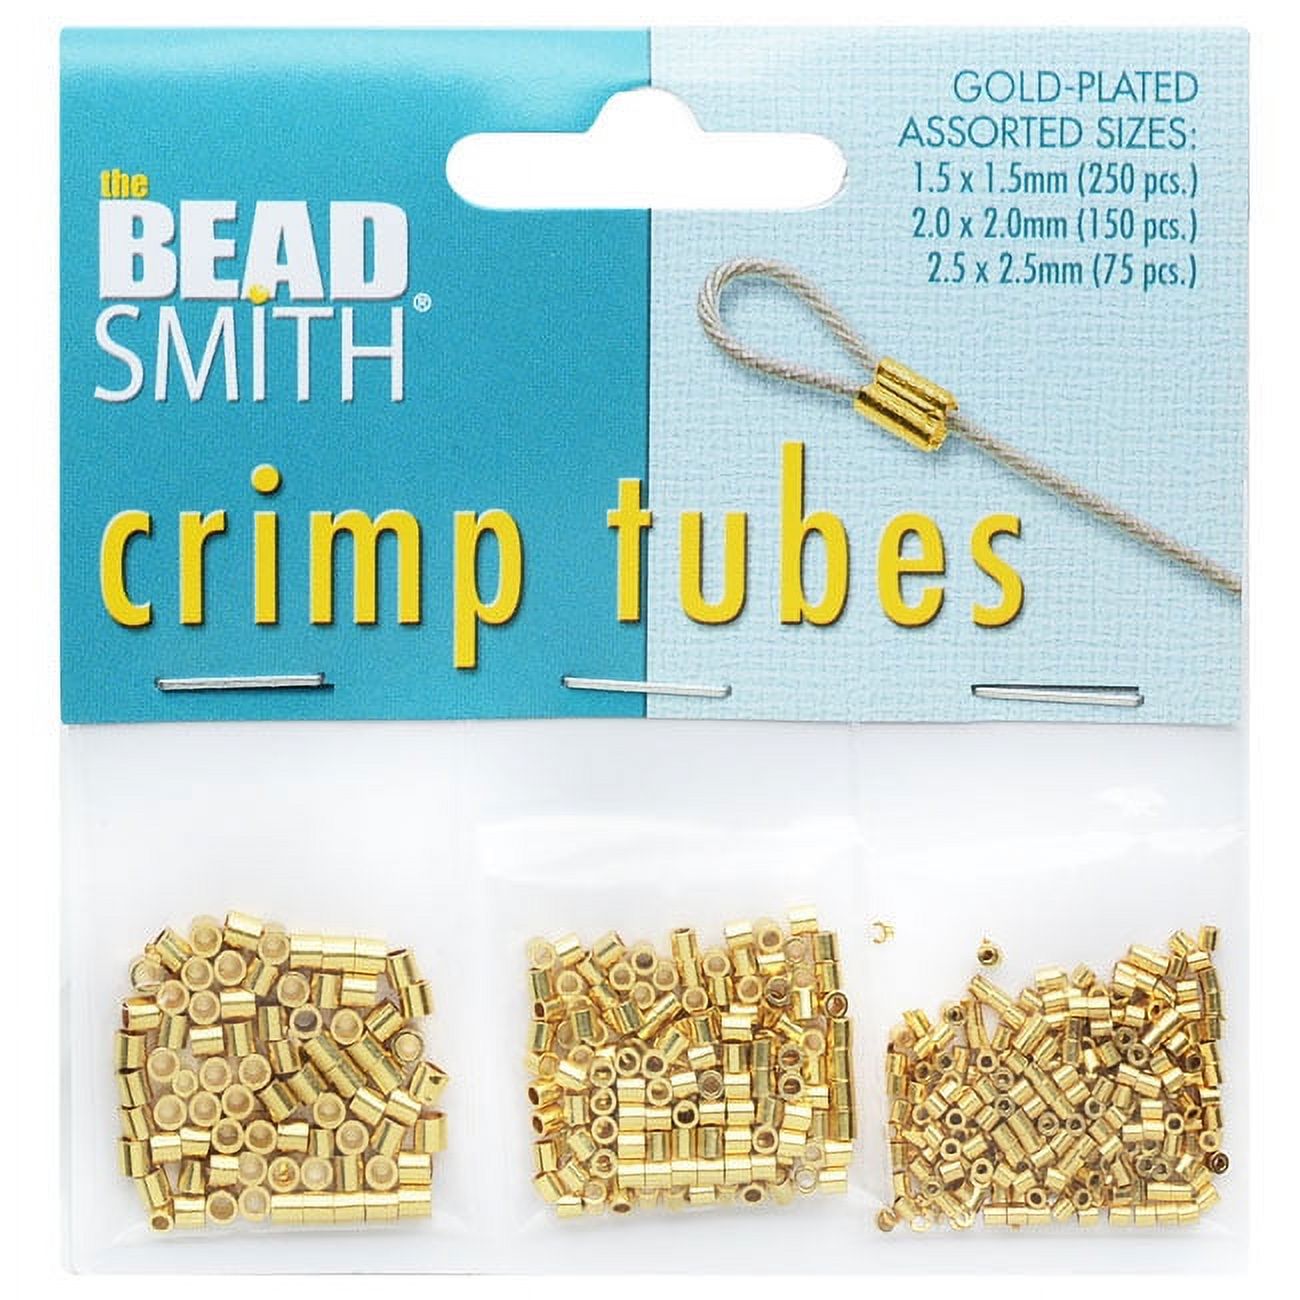 The Beadsmith Crimp Tube Assorted Variety Pack, 3 Sizes 1.5mm 2mm 2.5mm, 475 Pieces, Gold Plated - image 1 of 3